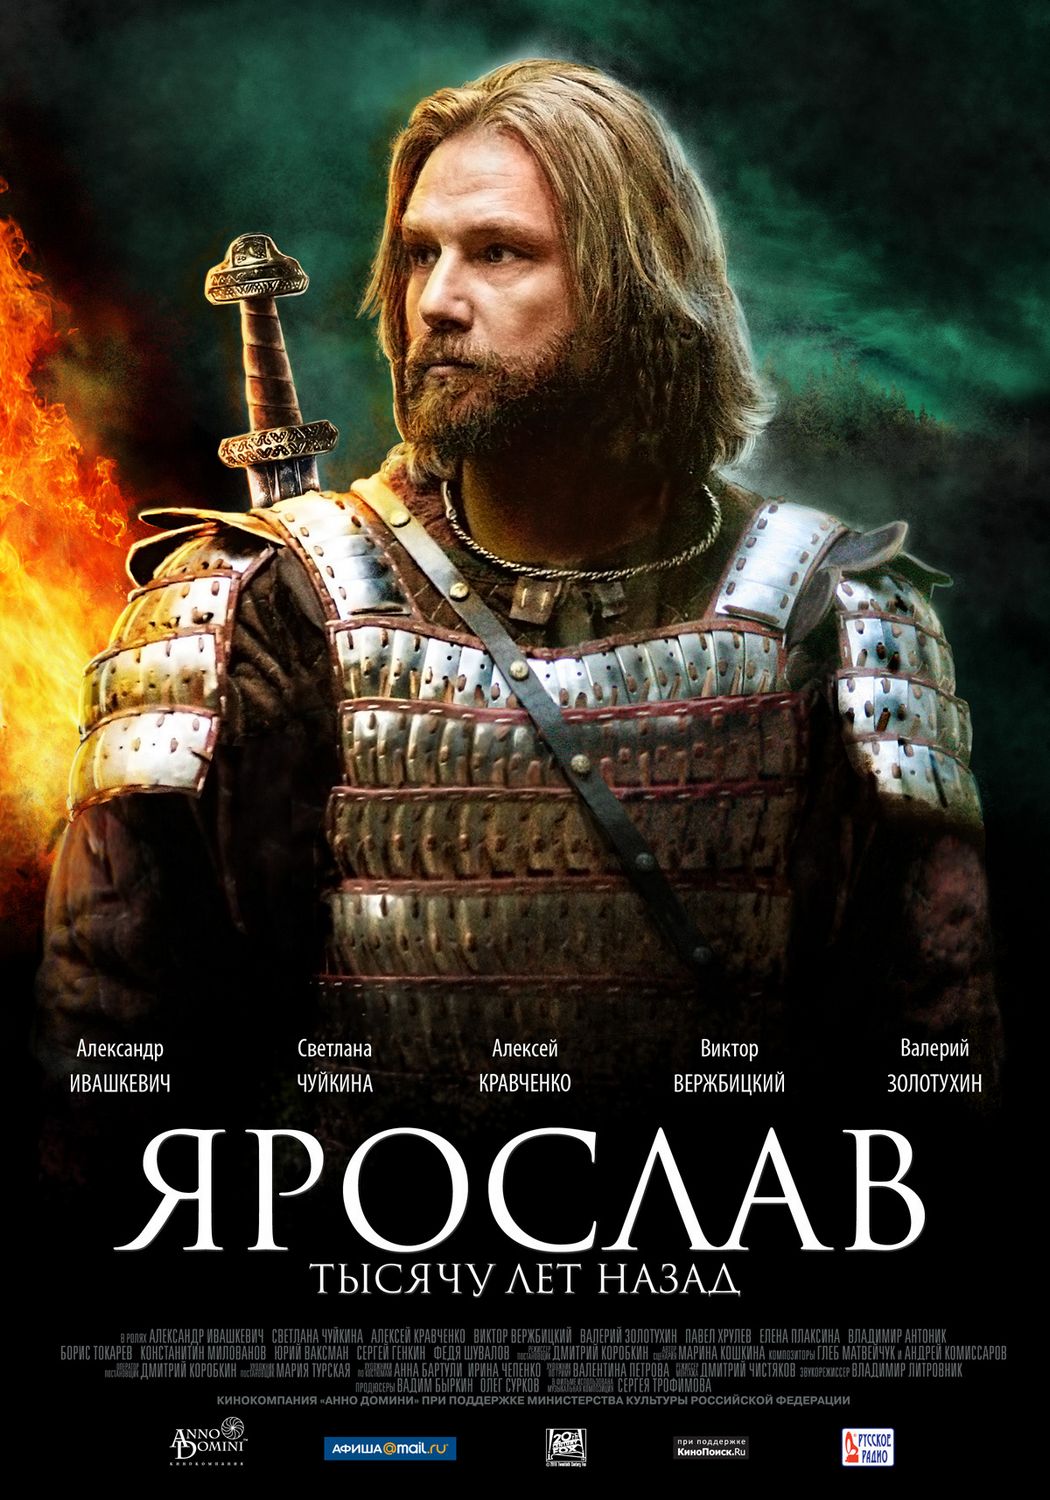 Extra Large Movie Poster Image for Yaroslav (#1 of 5)